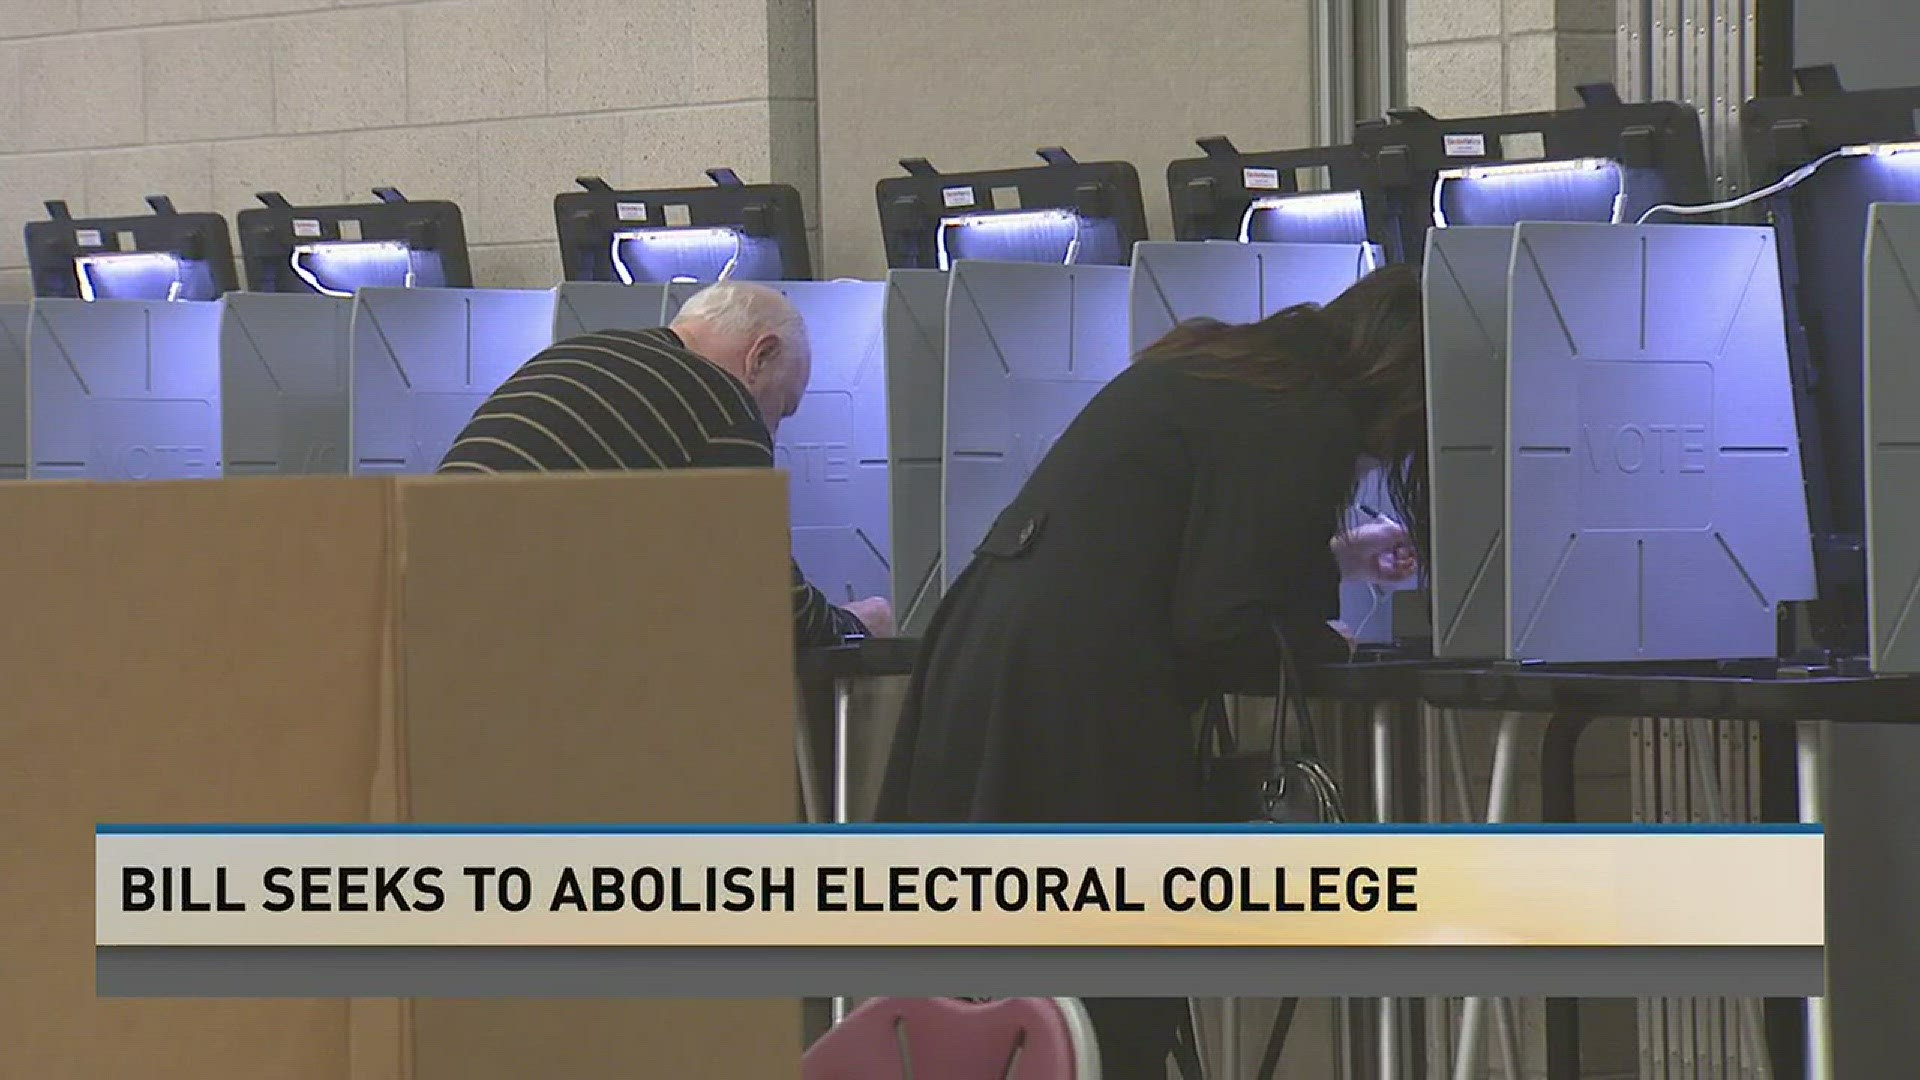 Meghan Bunchman tells us about an effort from a California Senator to end the Electoral College and why Donald Trump says it wouldn't have made a difference in the 2016 election.